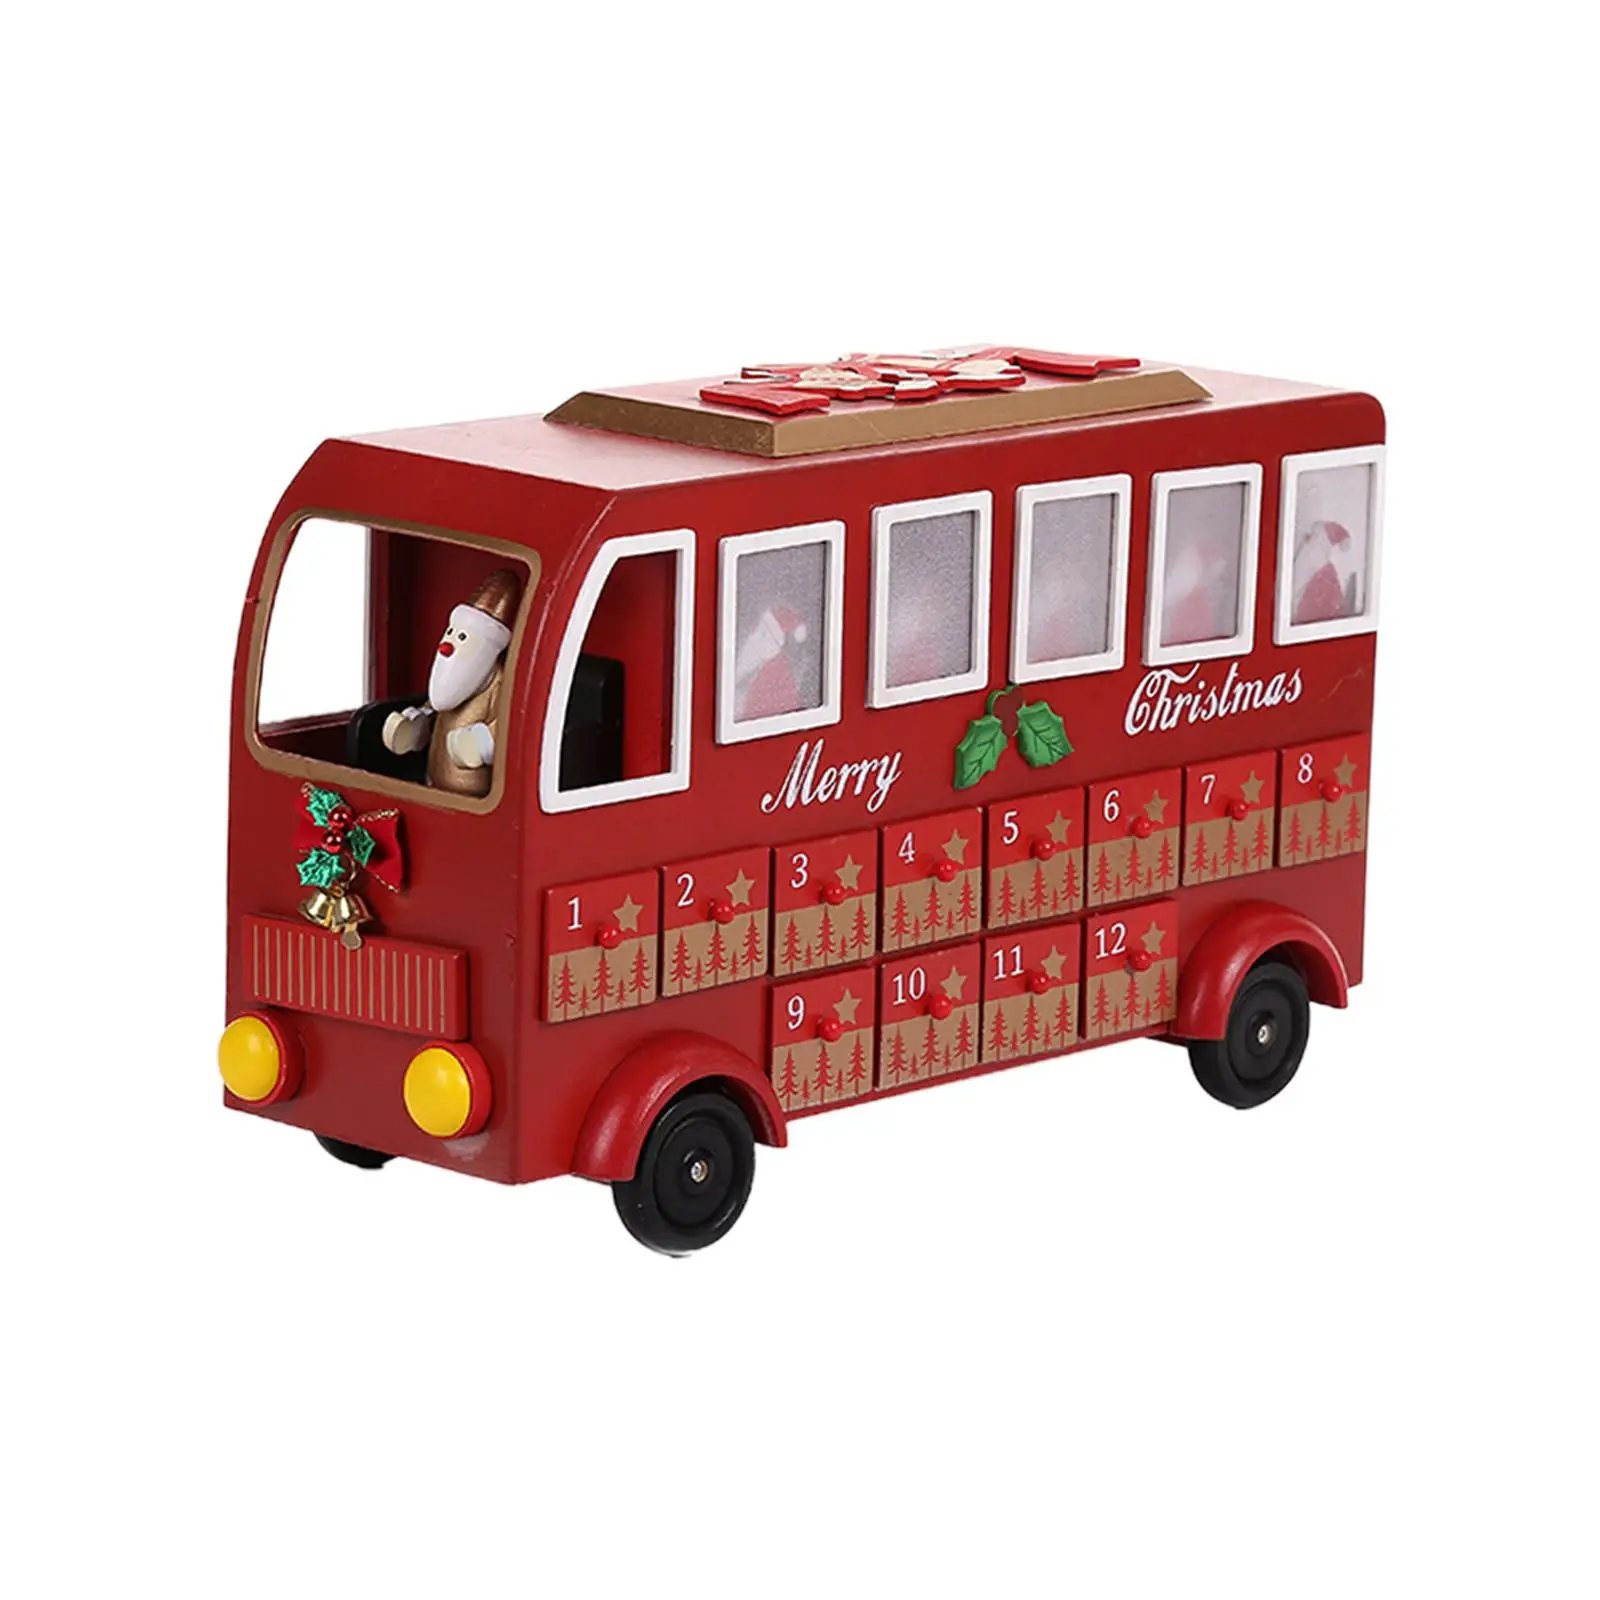 Table Christmas Wooden Advent Calendar Bus 24 Day Count Down Xmas Decor with 24 Drawer Durable Wood Material Festive